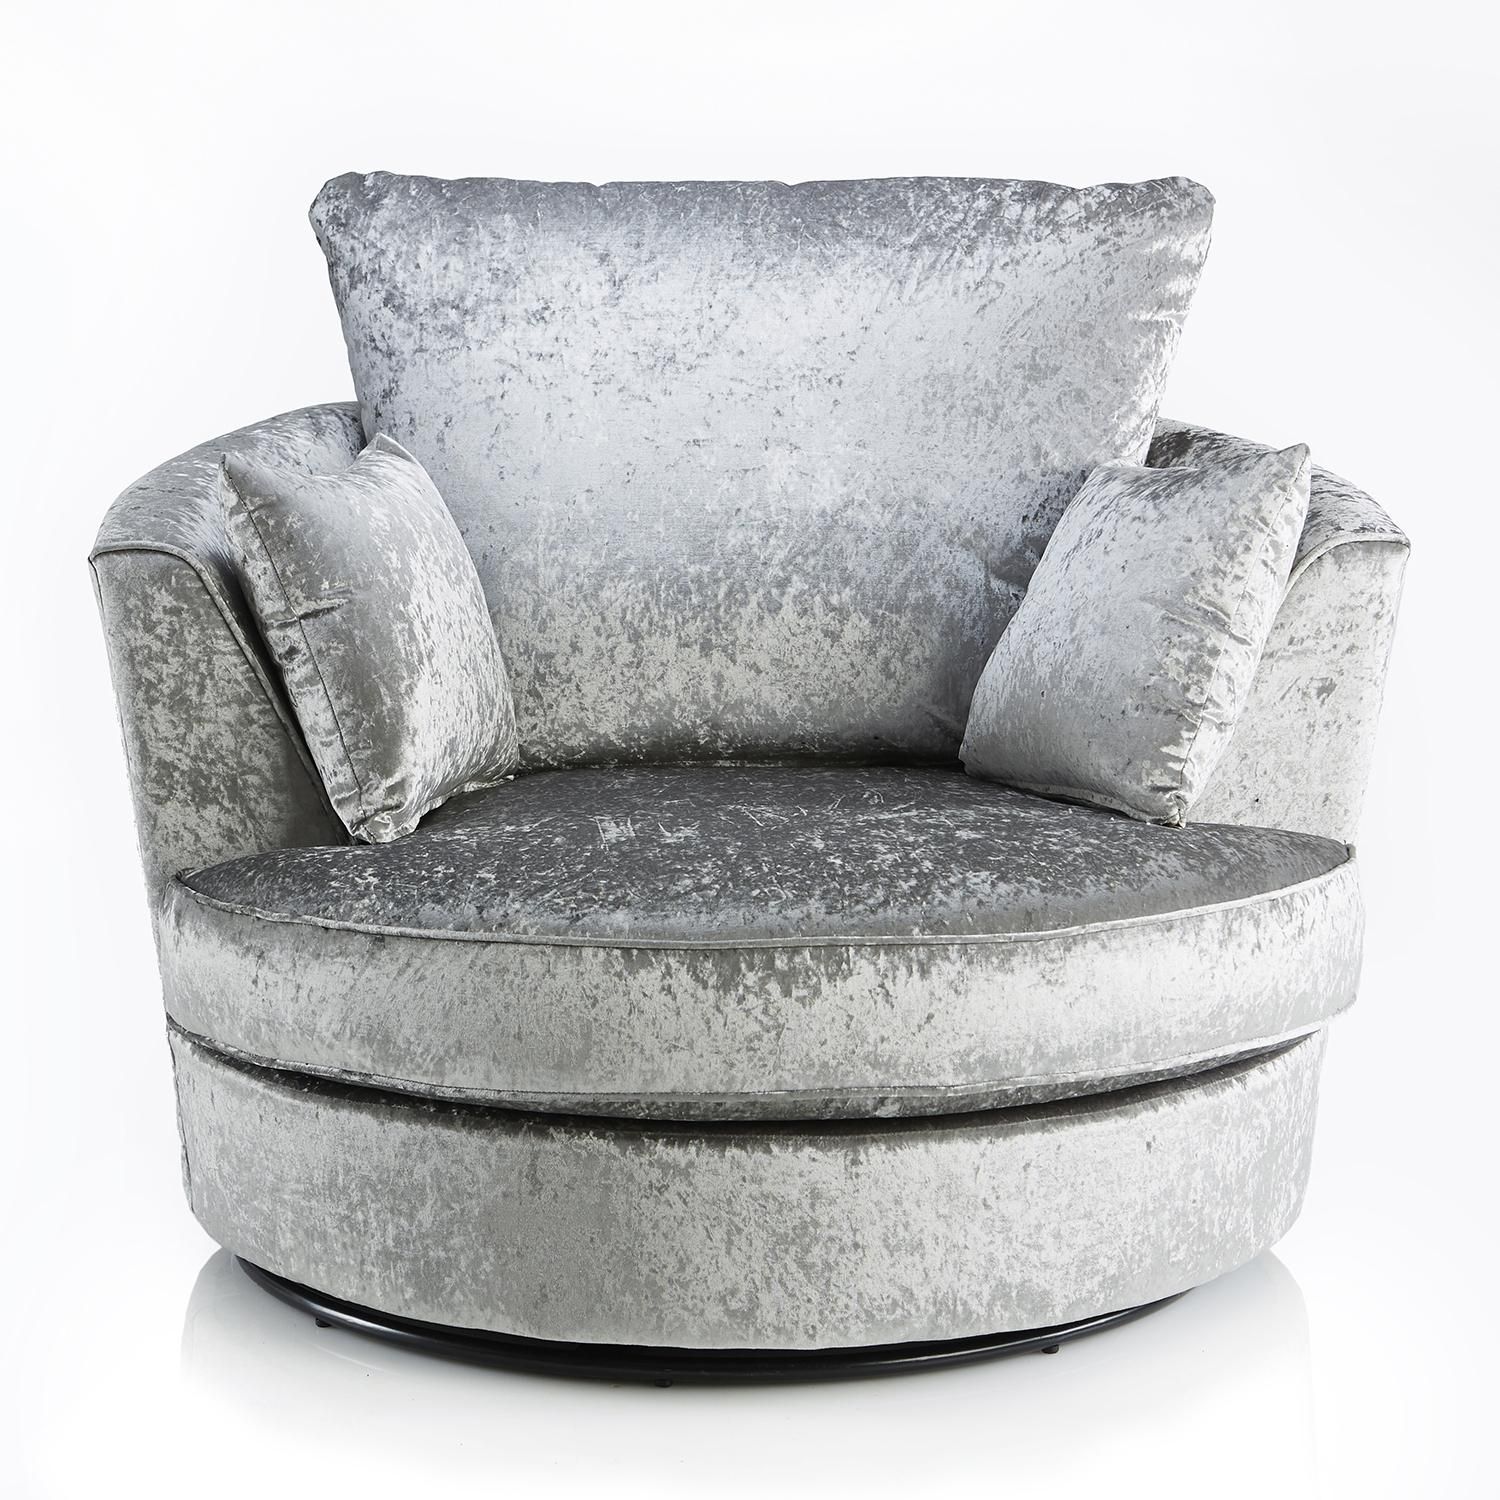 Crushed Velvet Furniture | Sofas, Beds, Chairs, Cushions For Sofa With Swivel Chair (View 5 of 20)